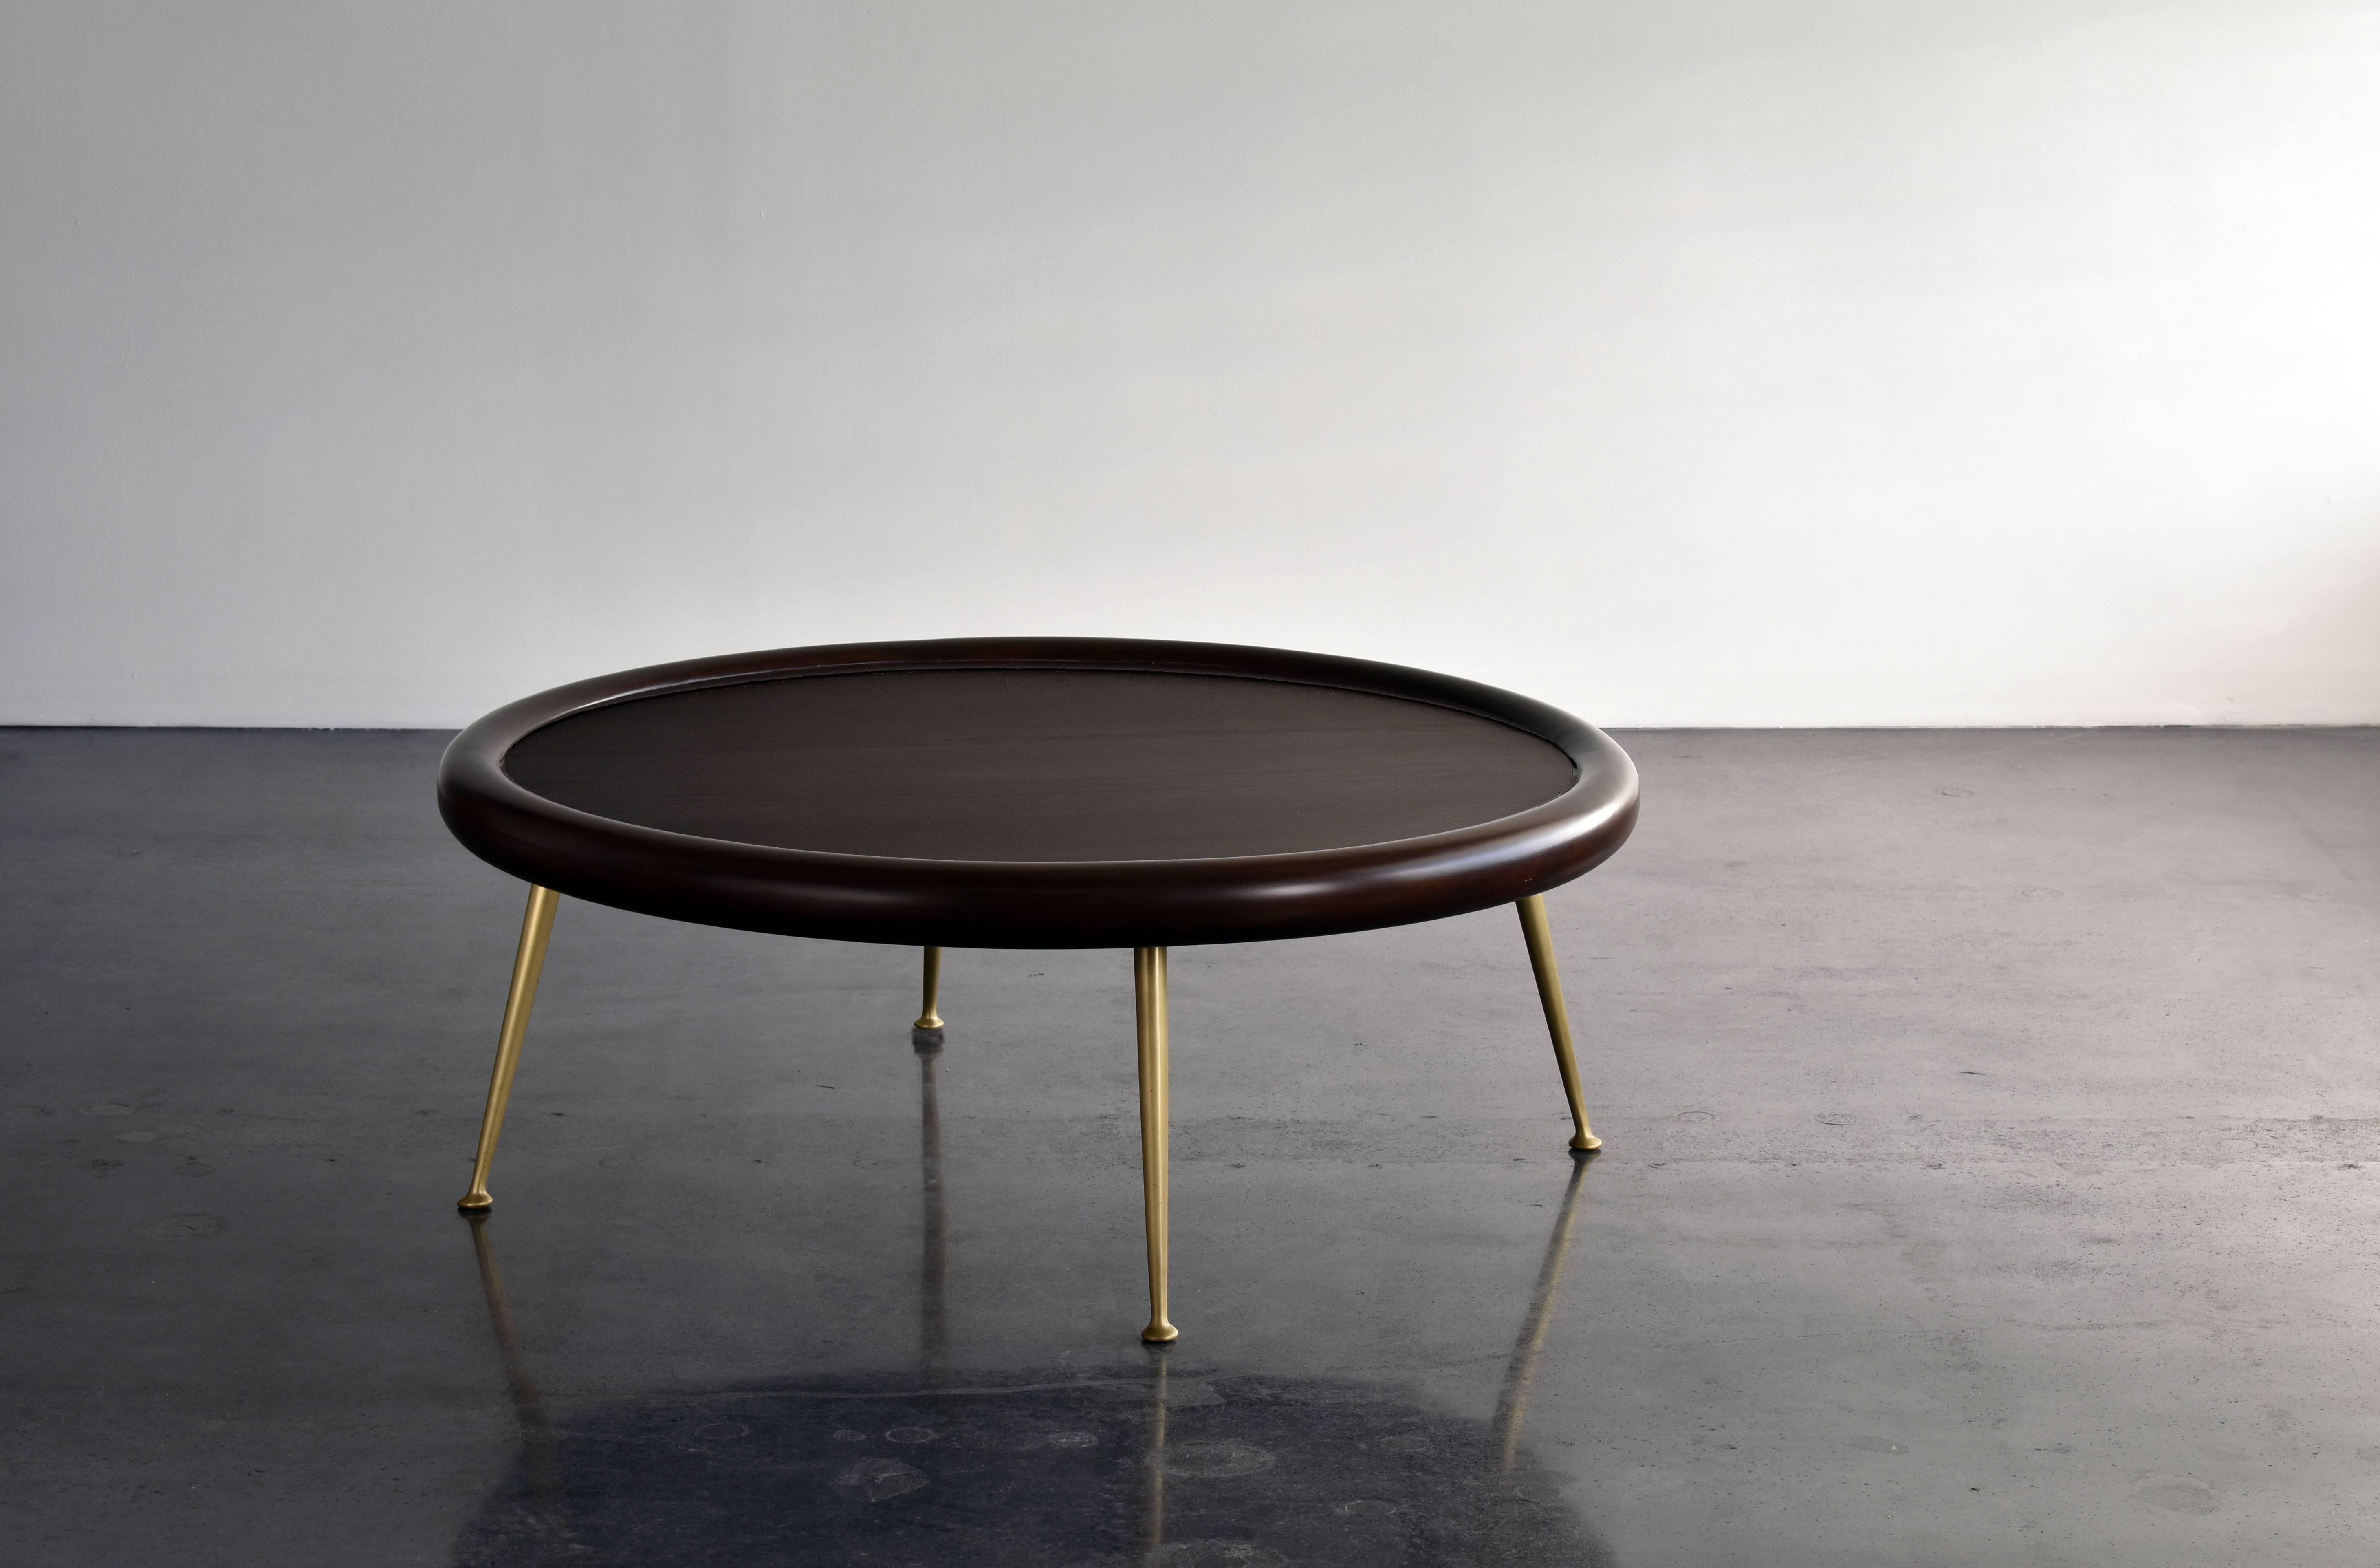 A modern coffee table partly lending it's aesthetics from ancient Grecian design. This theme being the hallmark of how the architect and furniture designer T.H. Robsjohn-Gibbings executed his designs. 

The dark-stained walnut top provides a